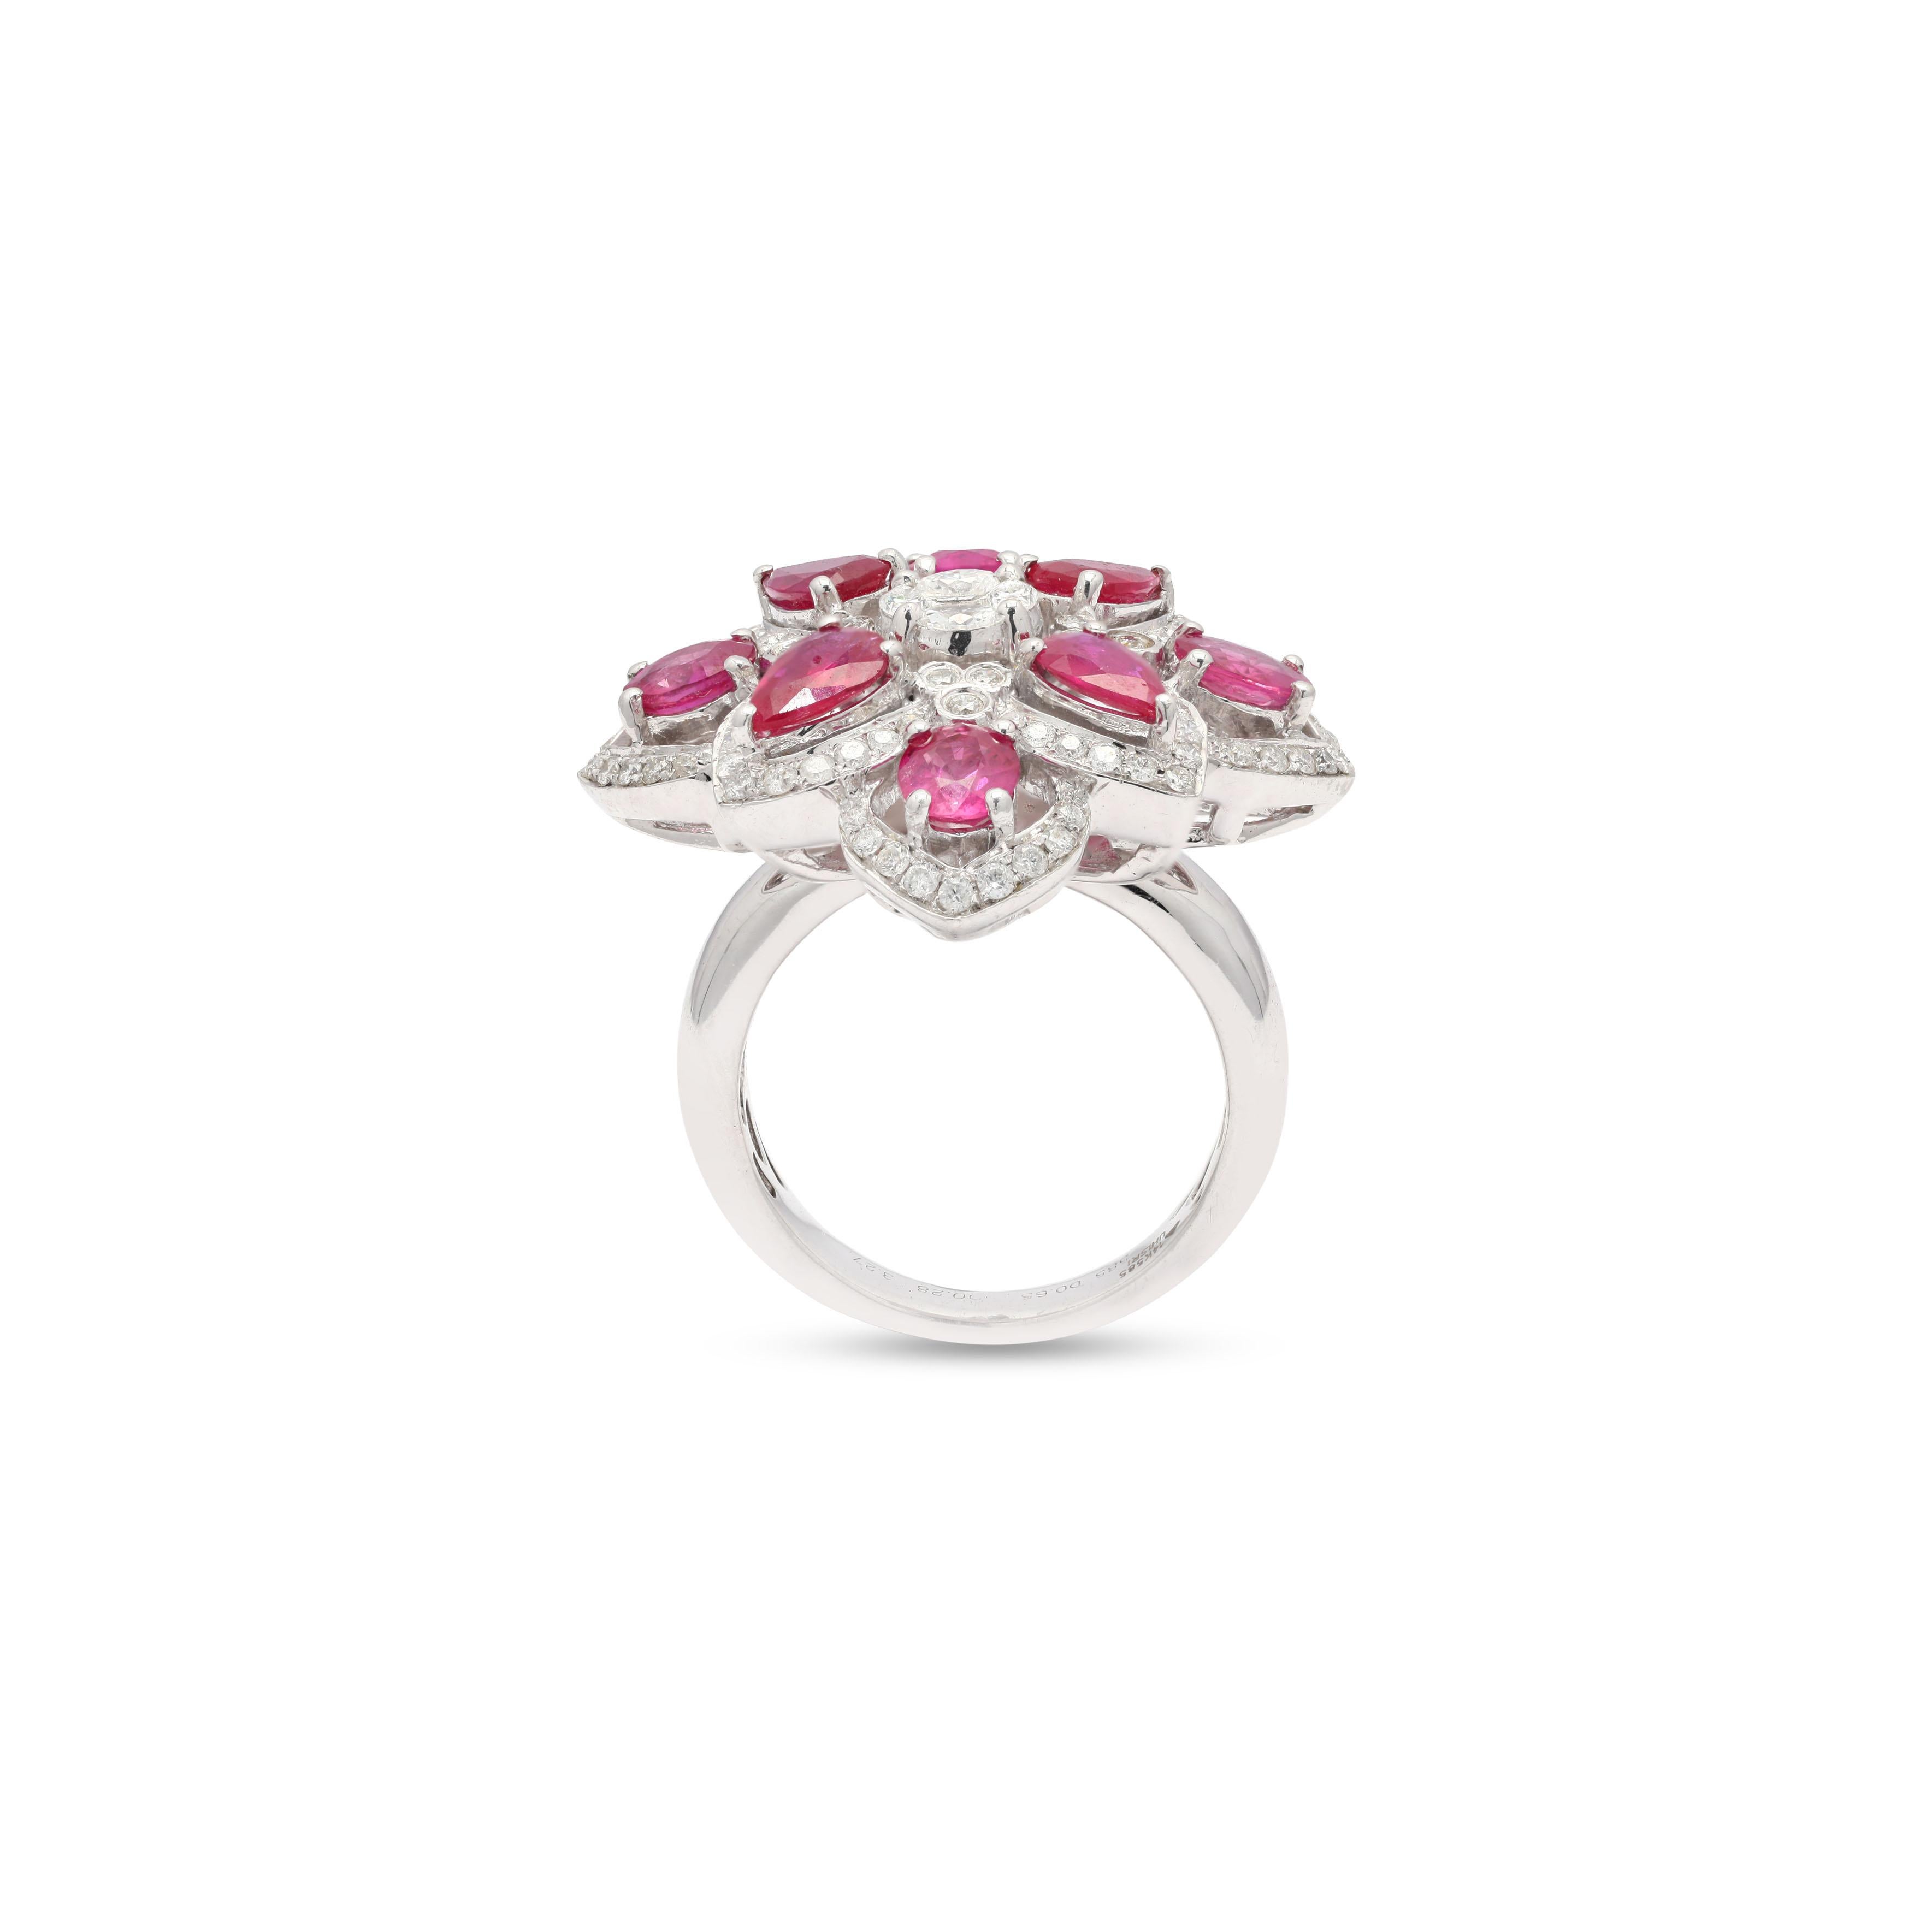 For Sale:  3.45 Carat Ruby and Diamond White Gold Ring in 14 Karat White Gold  4